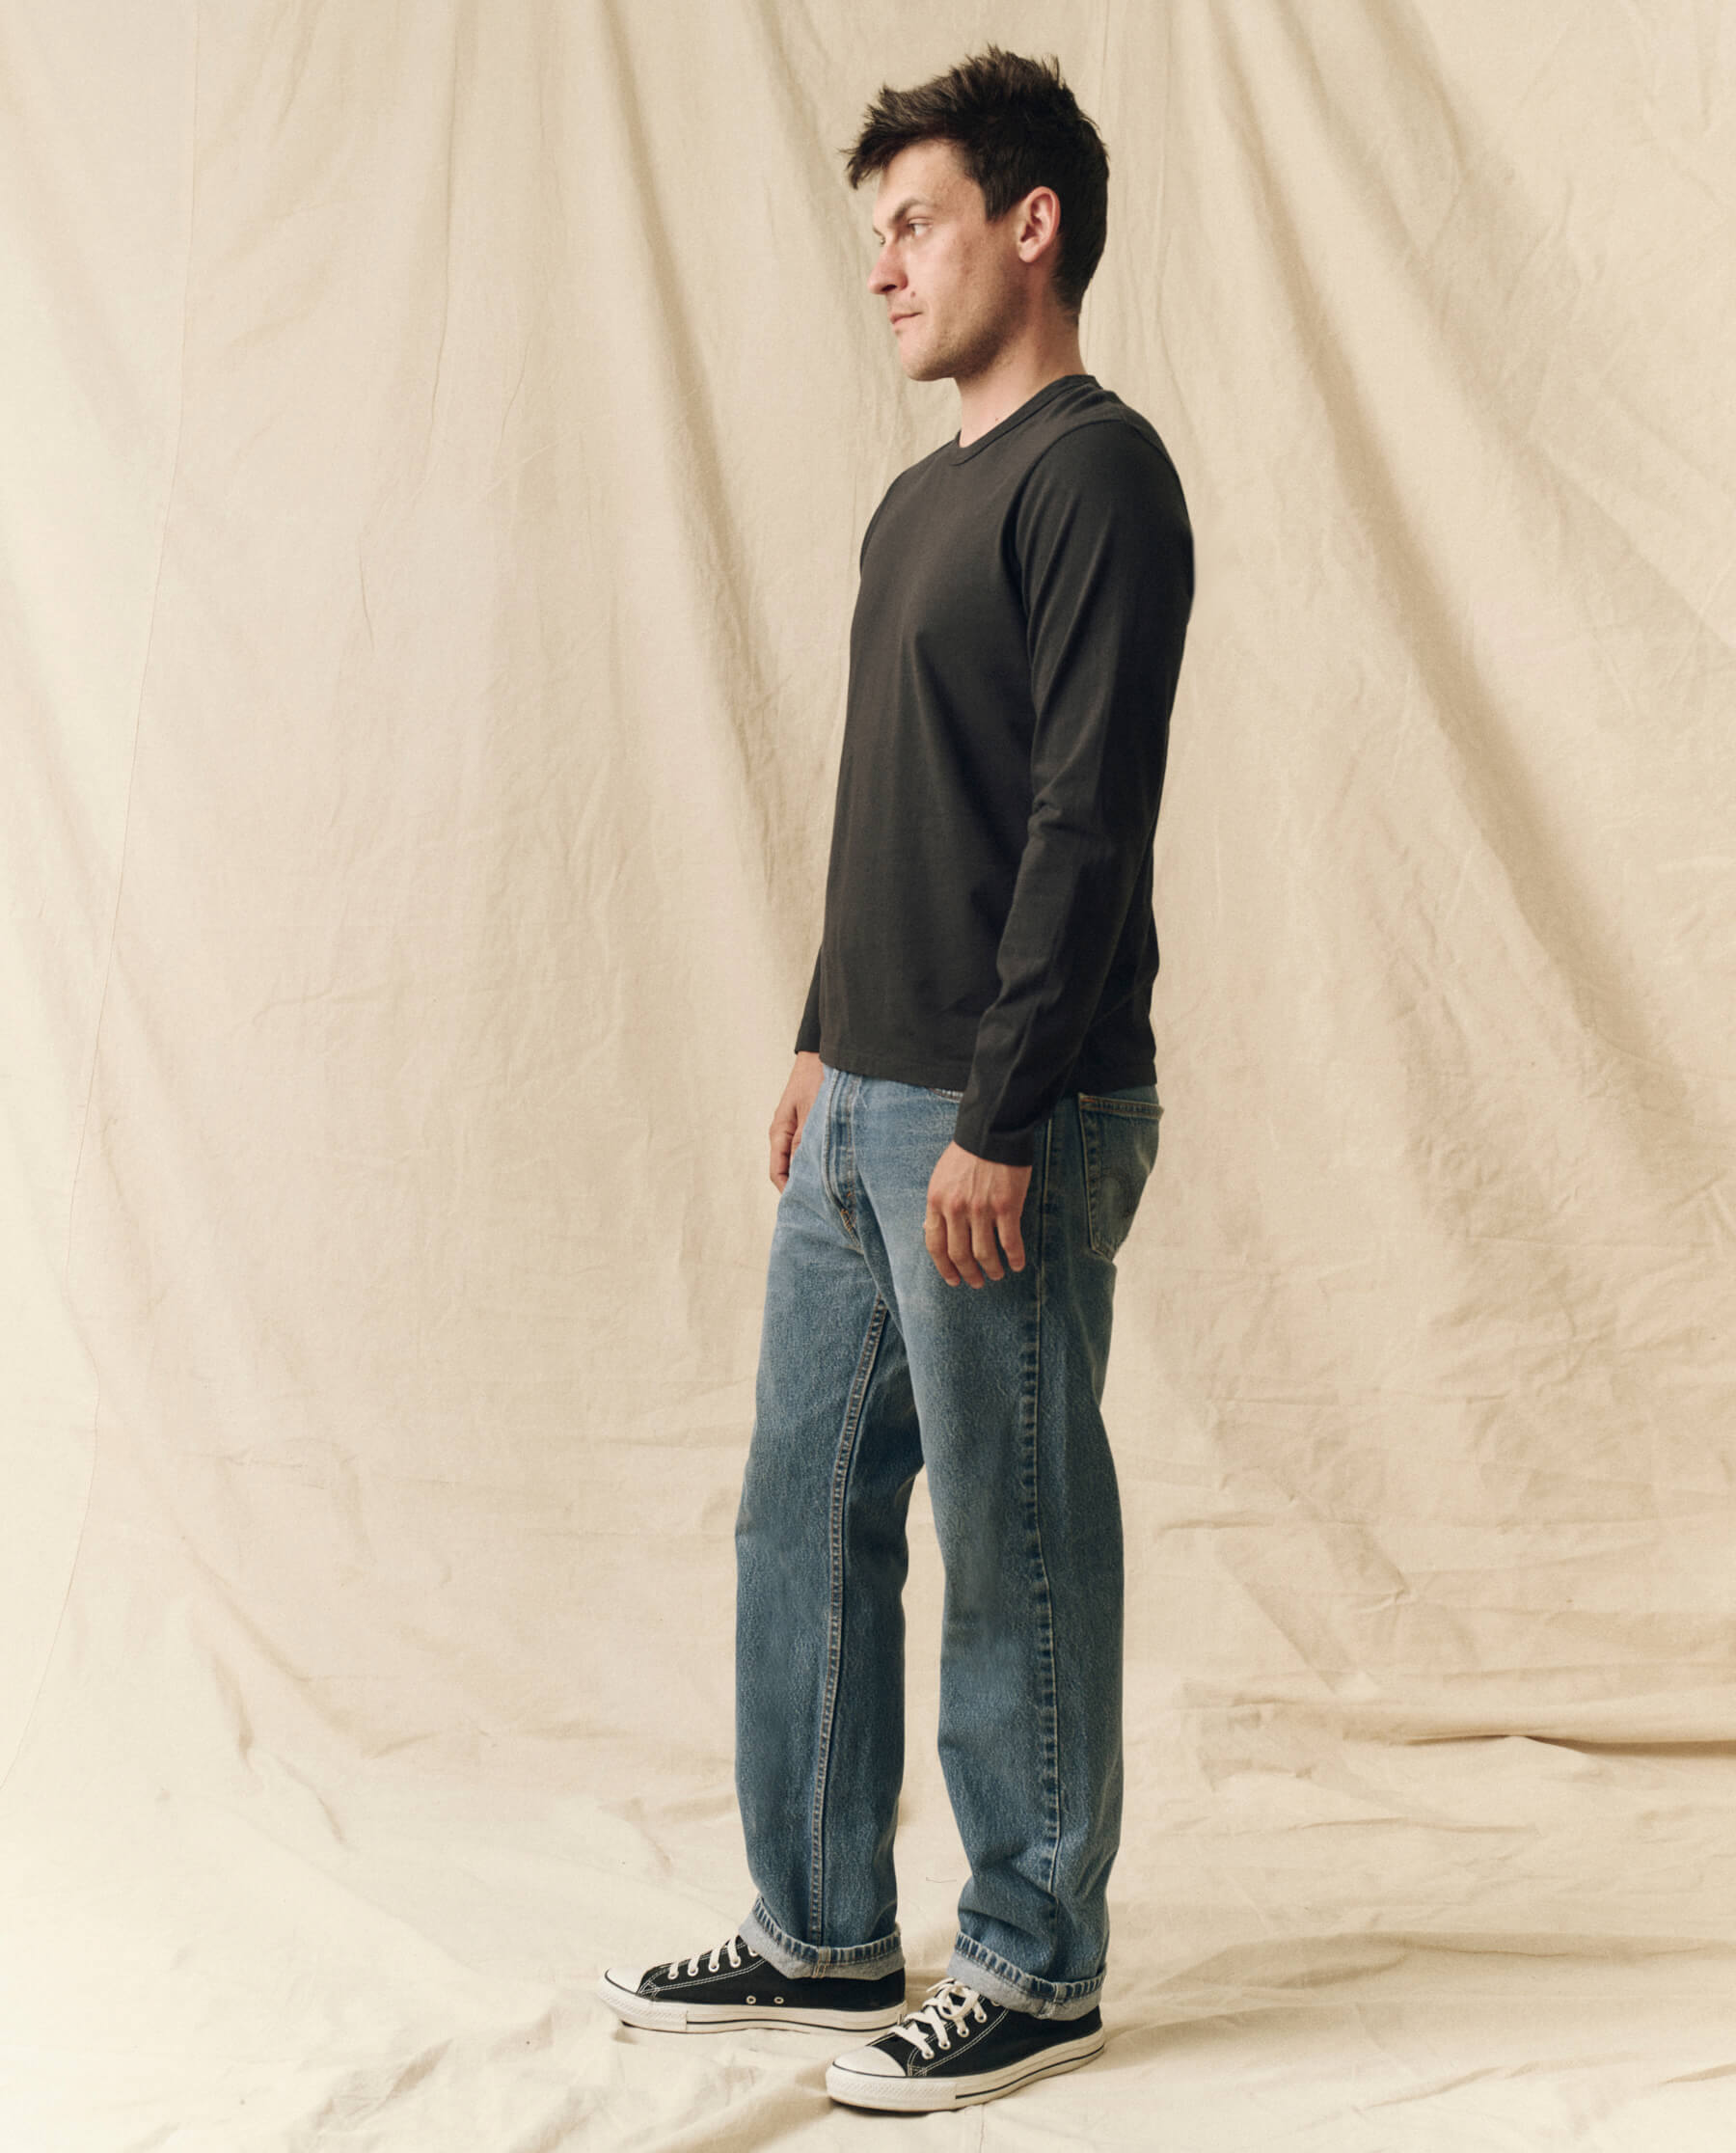 The Men's Pure Knits Long Sleeve Slim Crew. Solid -- Almost Black TEES THE GREAT. FALL 23 MEN